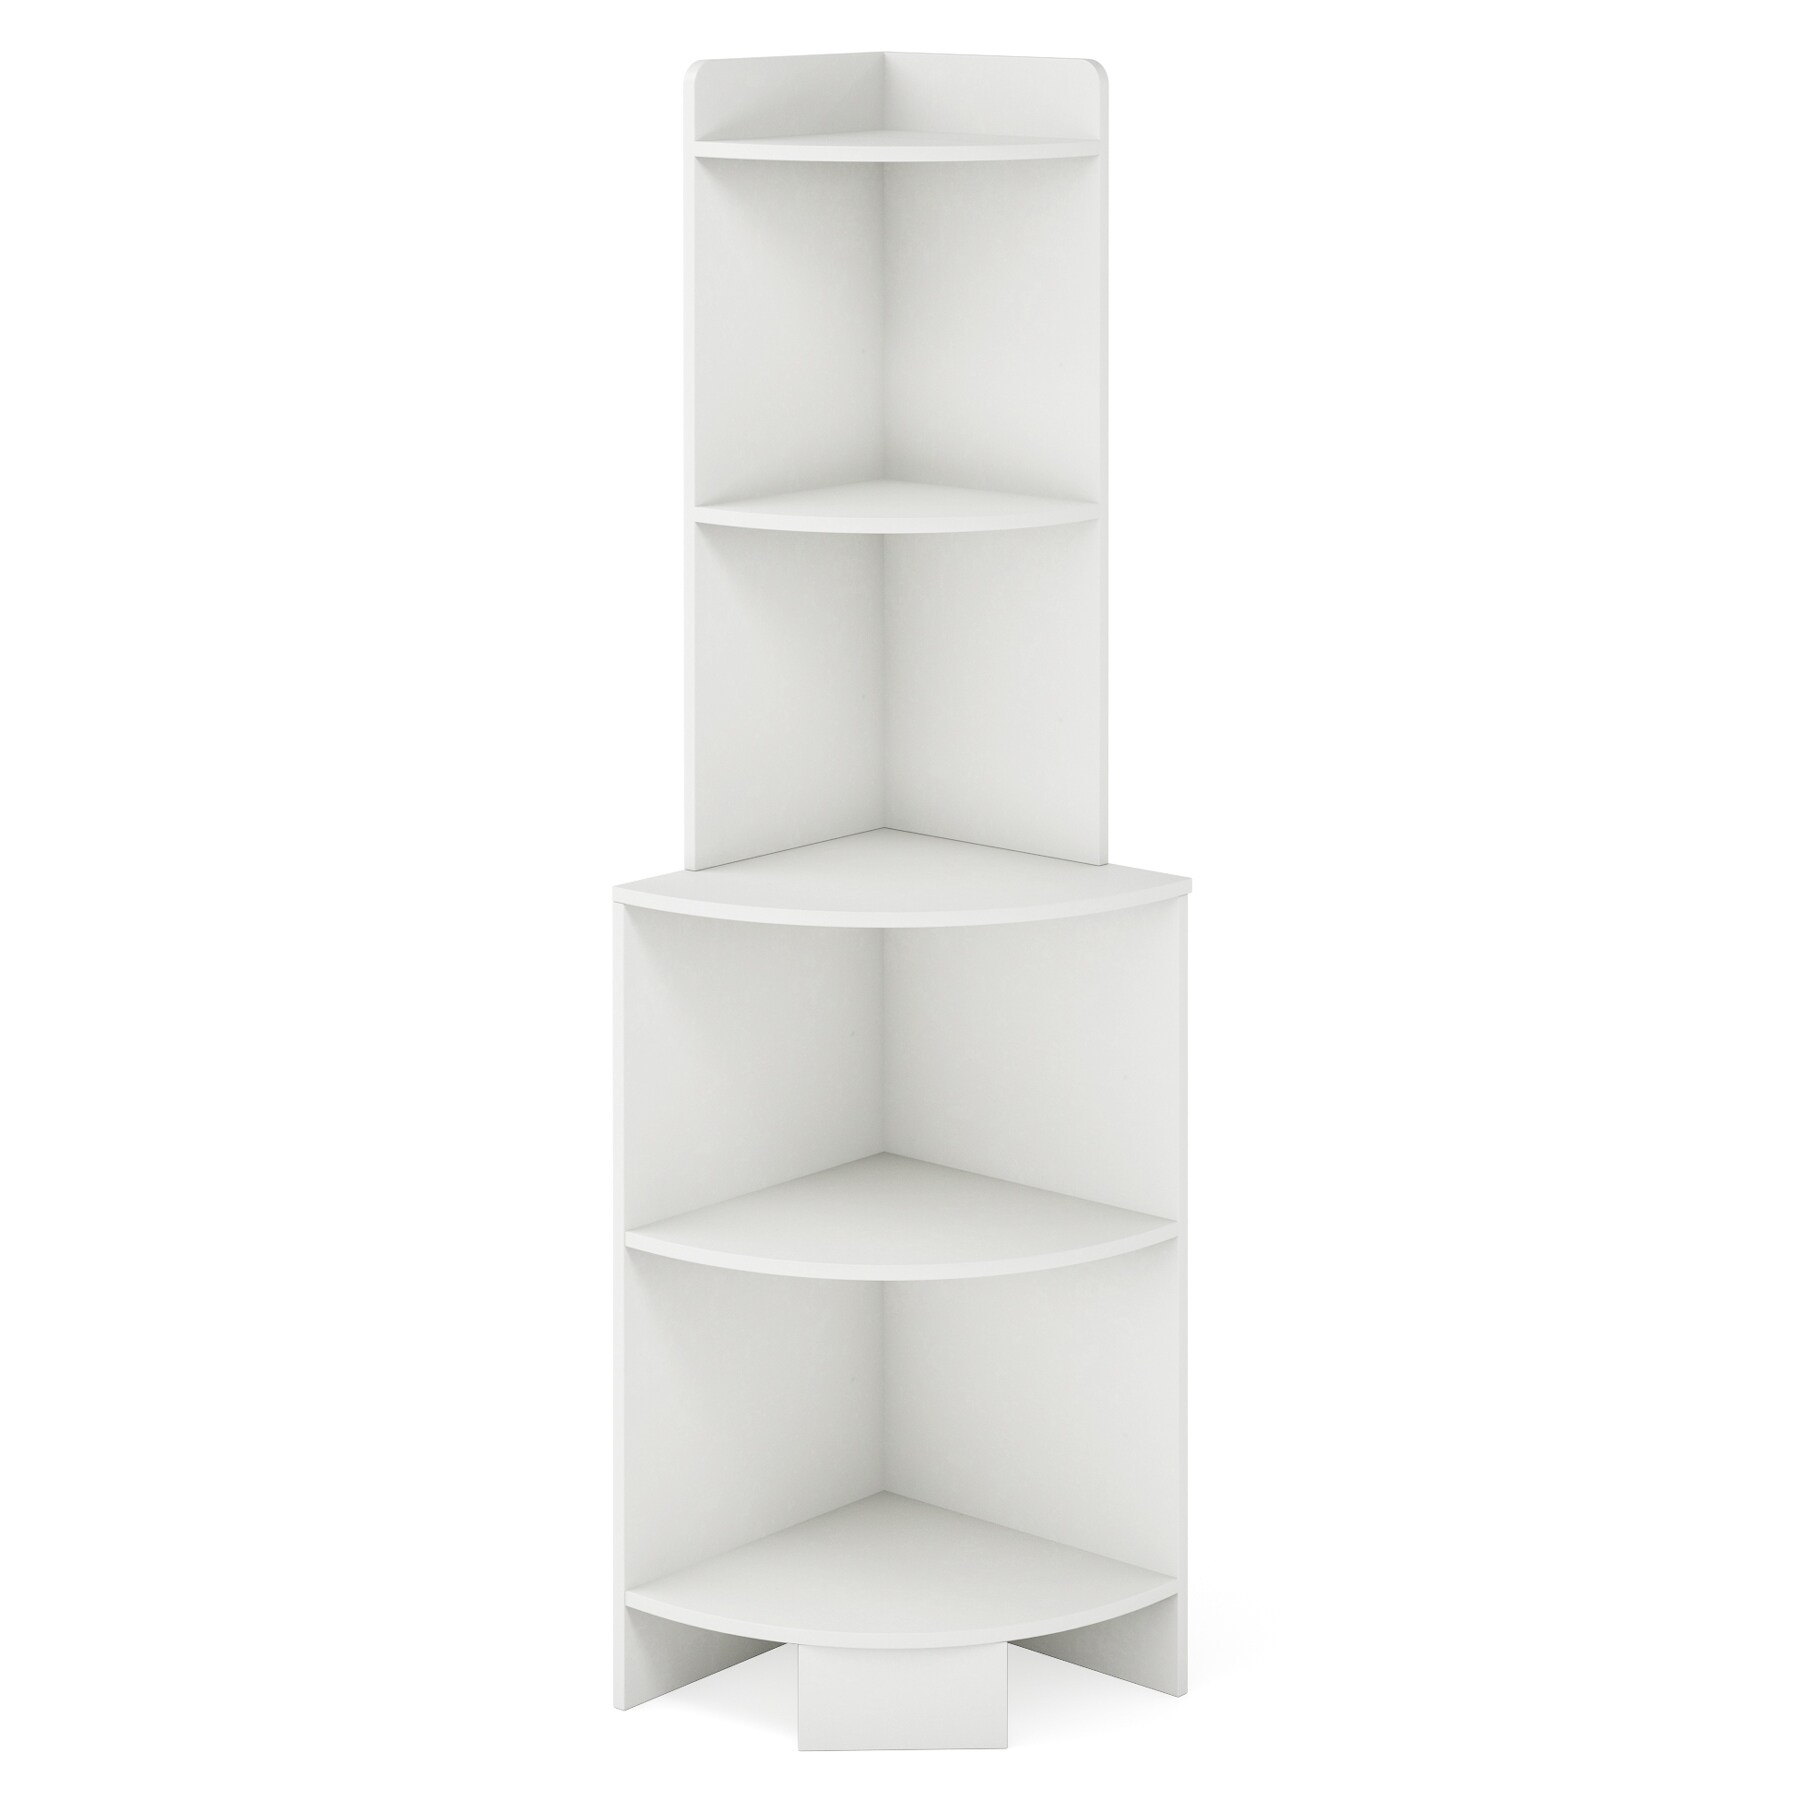 https://ak1.ostkcdn.com/images/products/is/images/direct/f2658d711b99c46379173f9bef86ebaf5743a133/60-Inch-Tall-Corner-Shelf%2C-5-Tier-Small-Bookcase%2C-Industrial-Plant-Stand-for-Living-Room%2C-Bedroom%2C-Home-Office.jpg